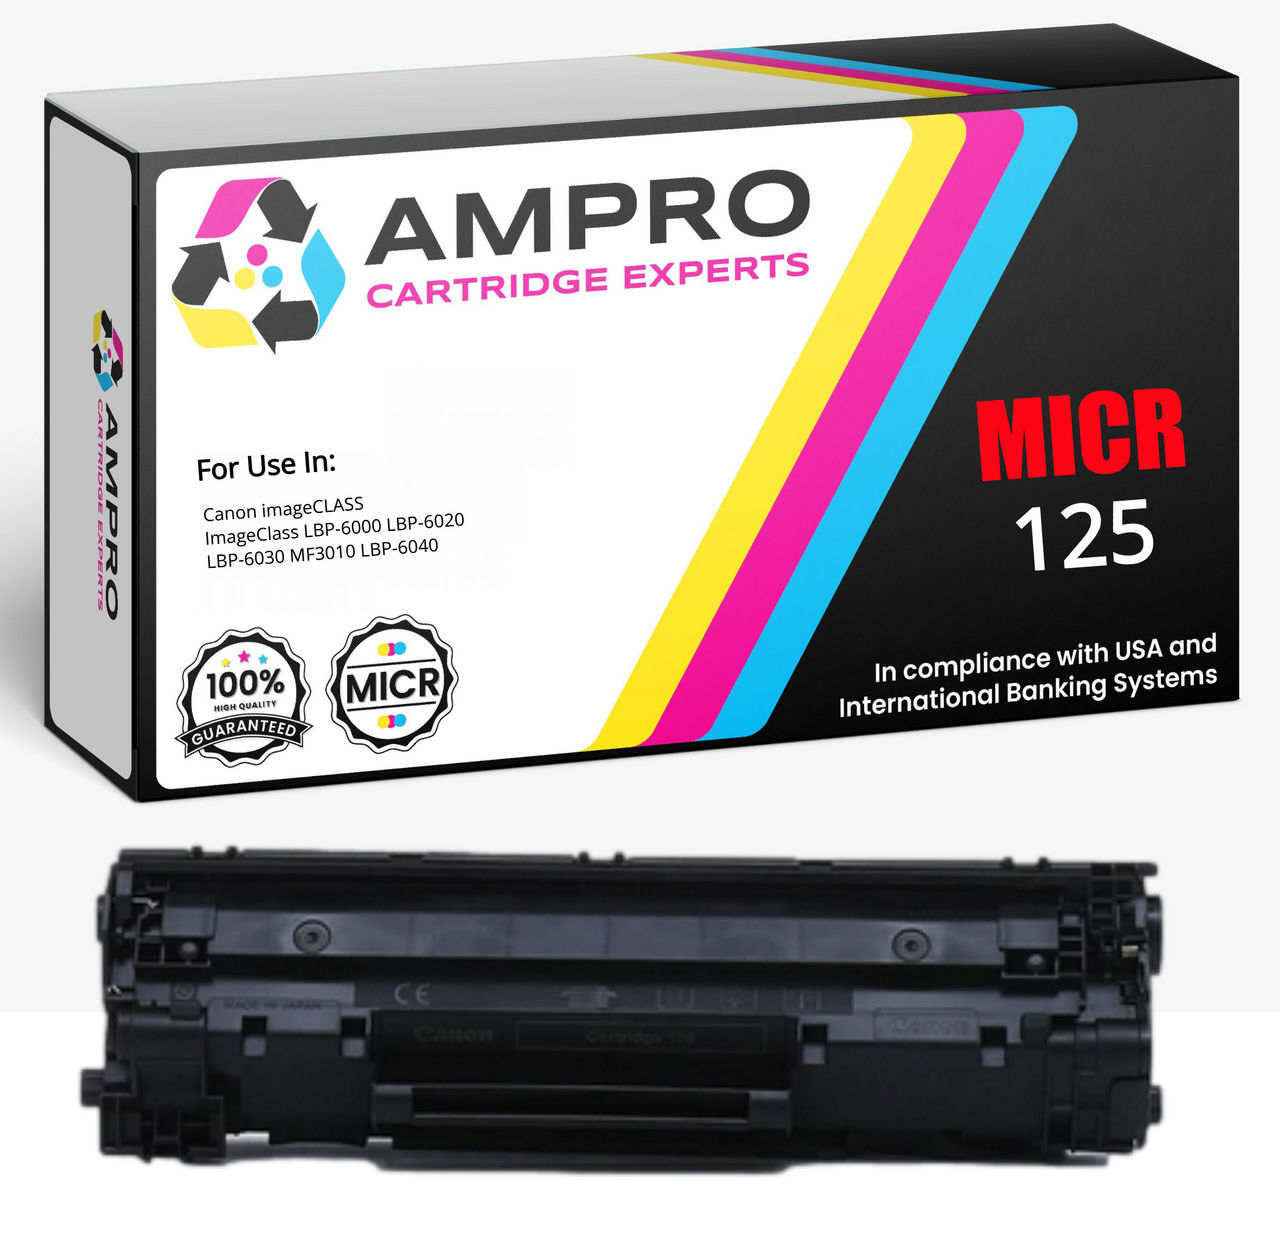 Ampro MICR Compatible Toner Cartridges Replacement for Canon 125 (‎3484B001) to ImageClass